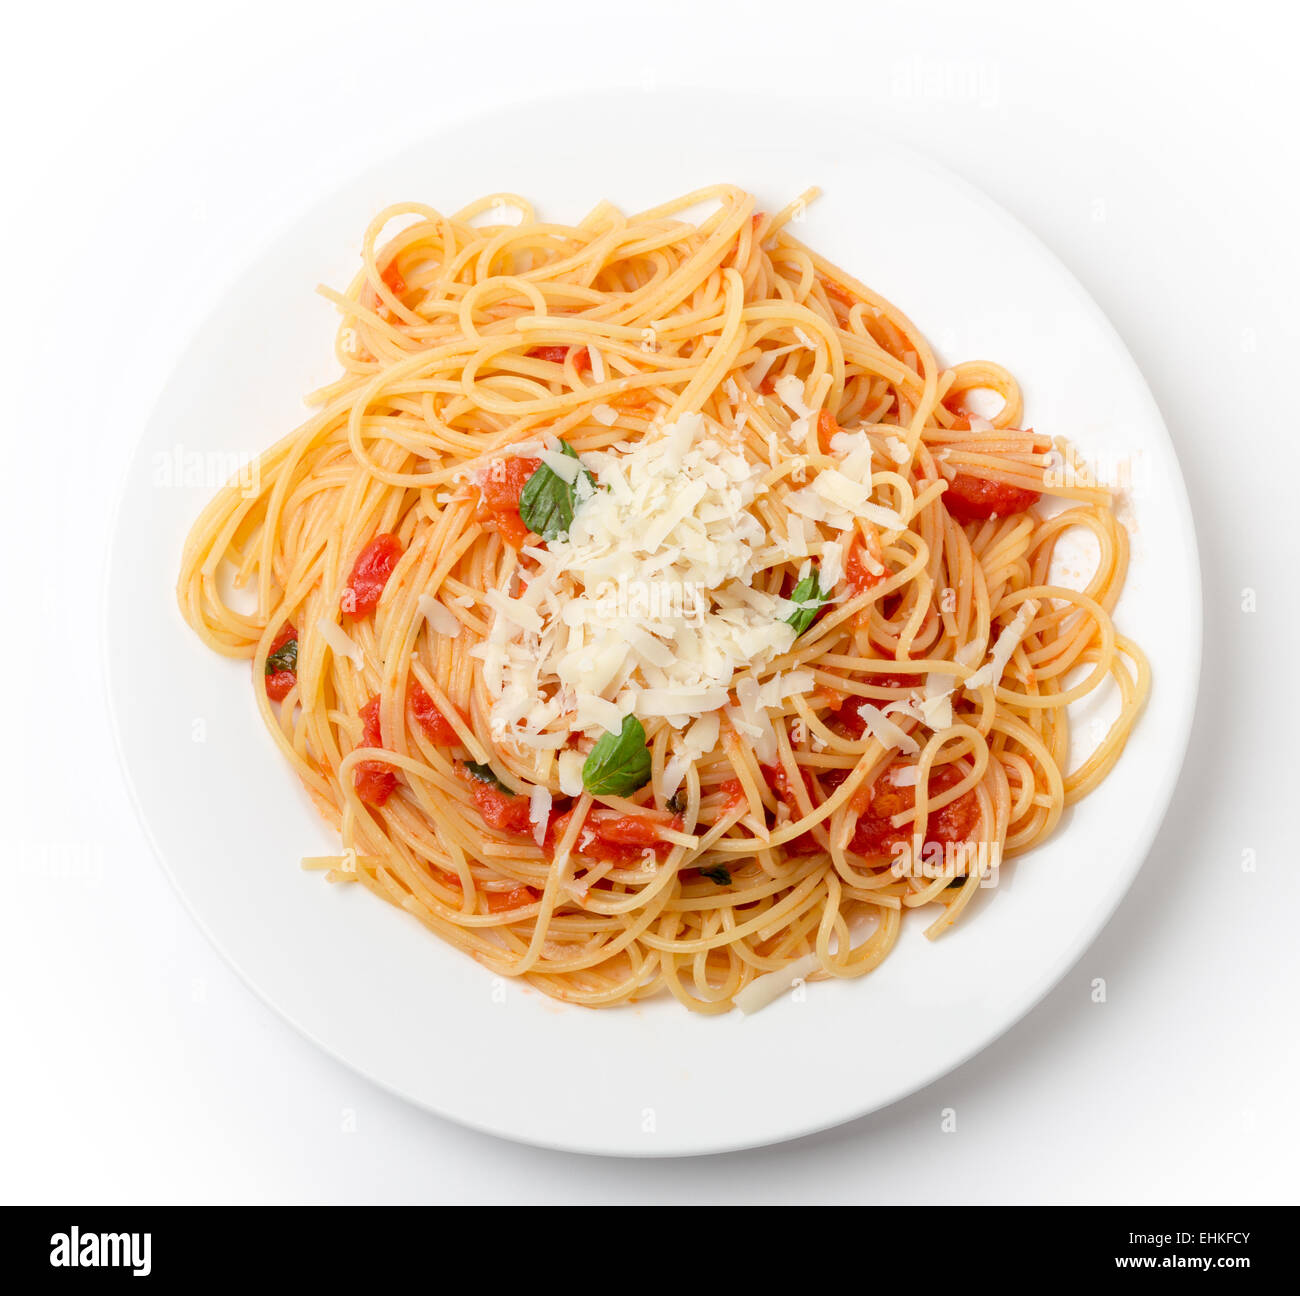 Spaghetti al pomodoro, one of the simplest Italian rustic dishes with the pasta tossed in a sauce of tomato, basil, garlic and a Stock Photo